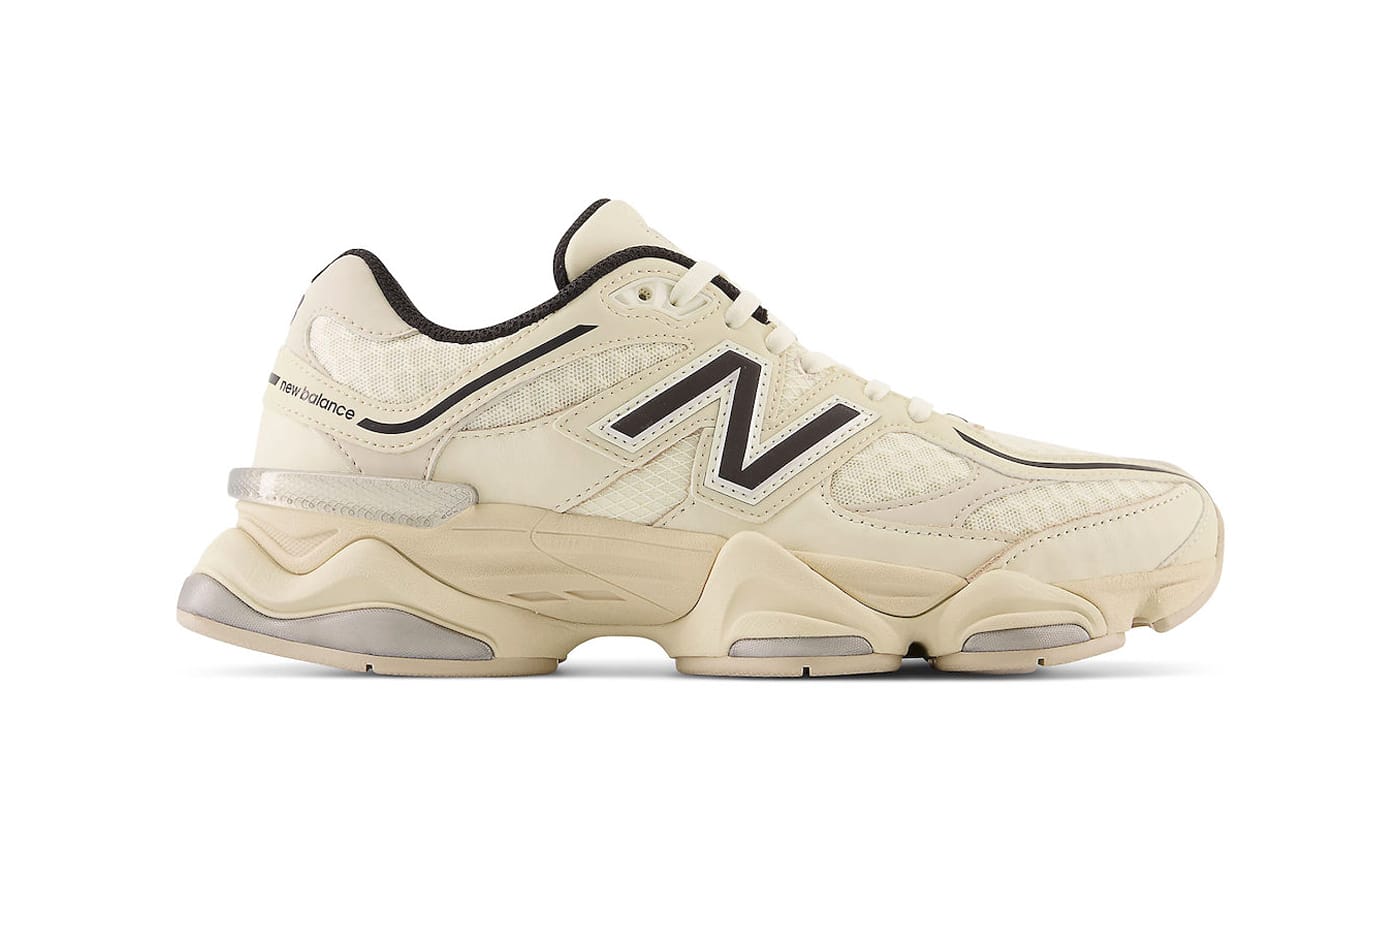 New Balance 9060 Arrives in 